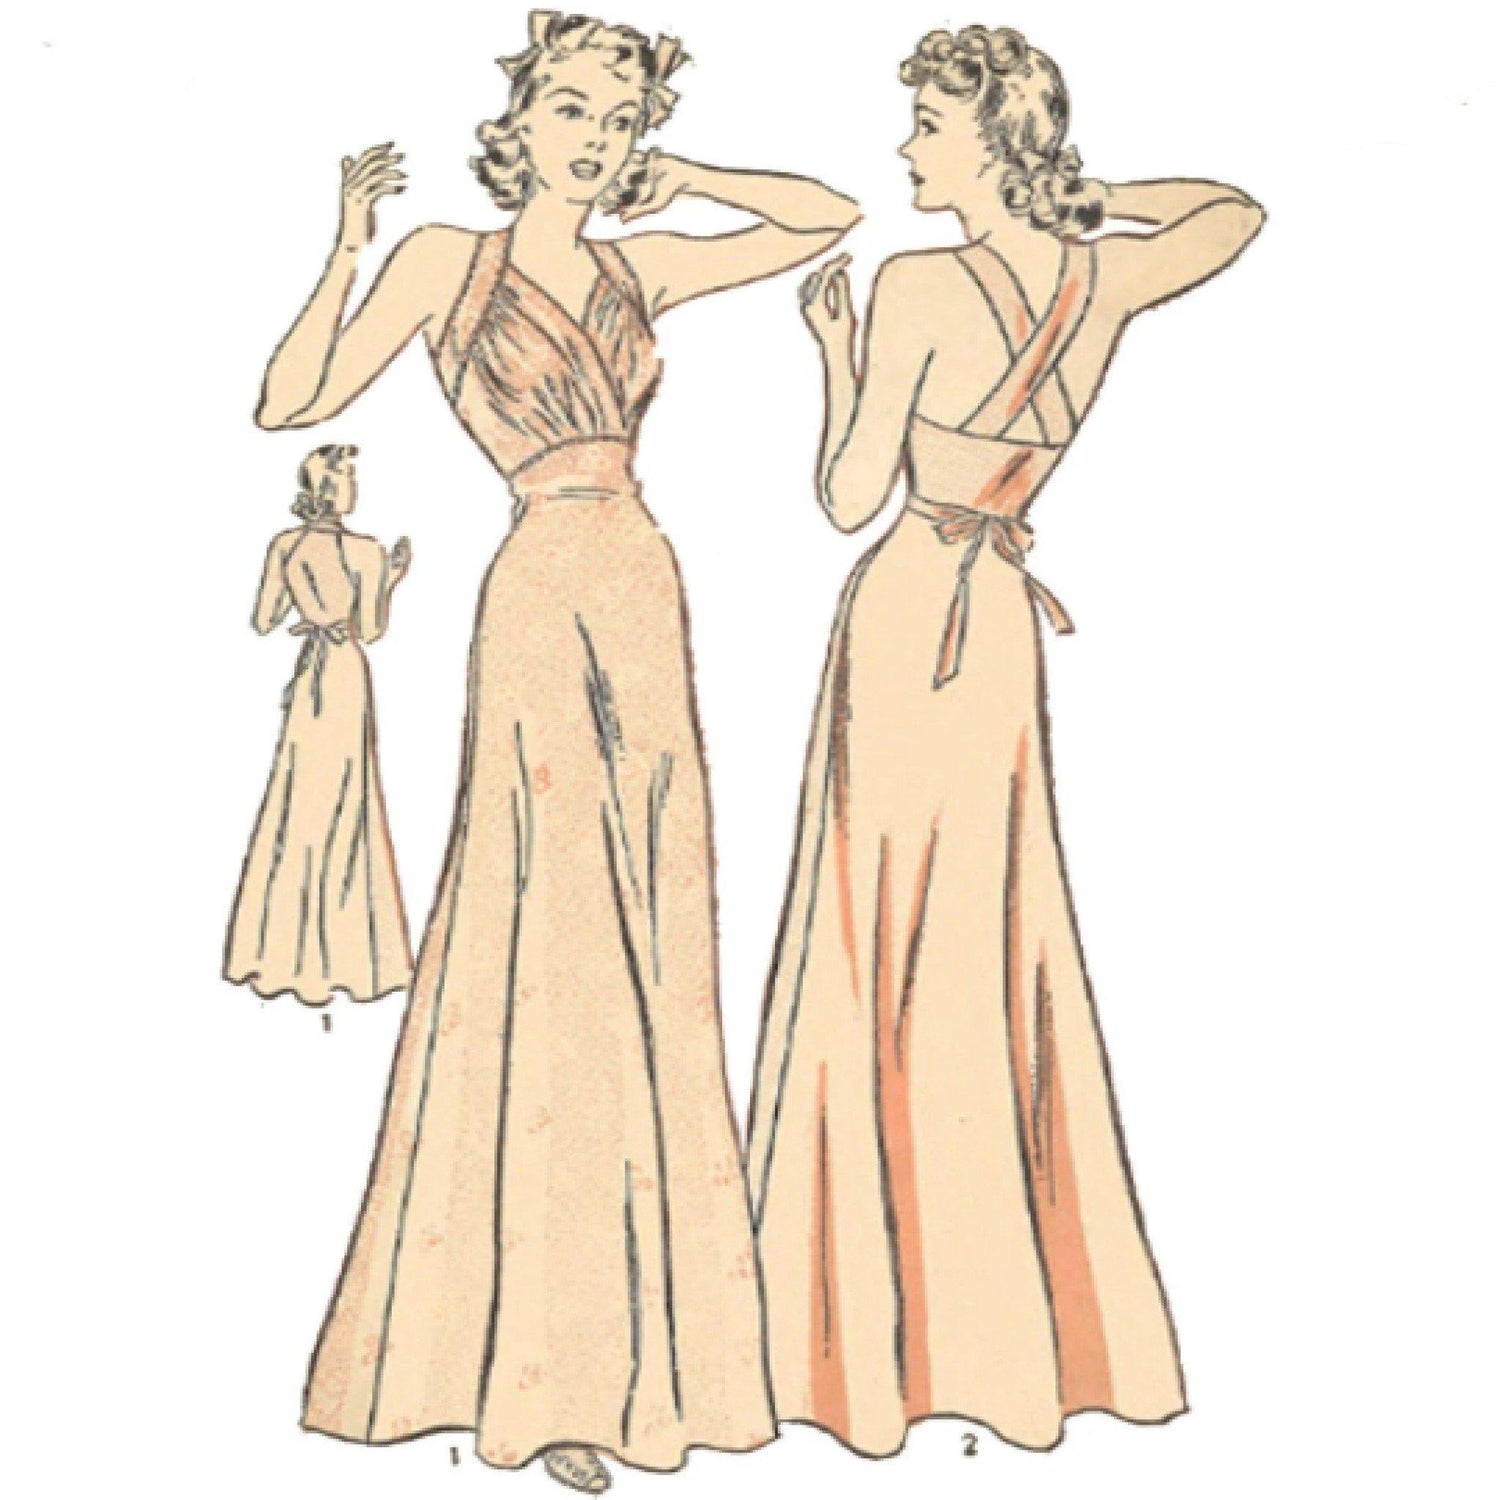 Vintage 1930s Pattern, Women's Night Gown, Lingerie, Pinup PDF Download - Vintage Sewing Pattern Company